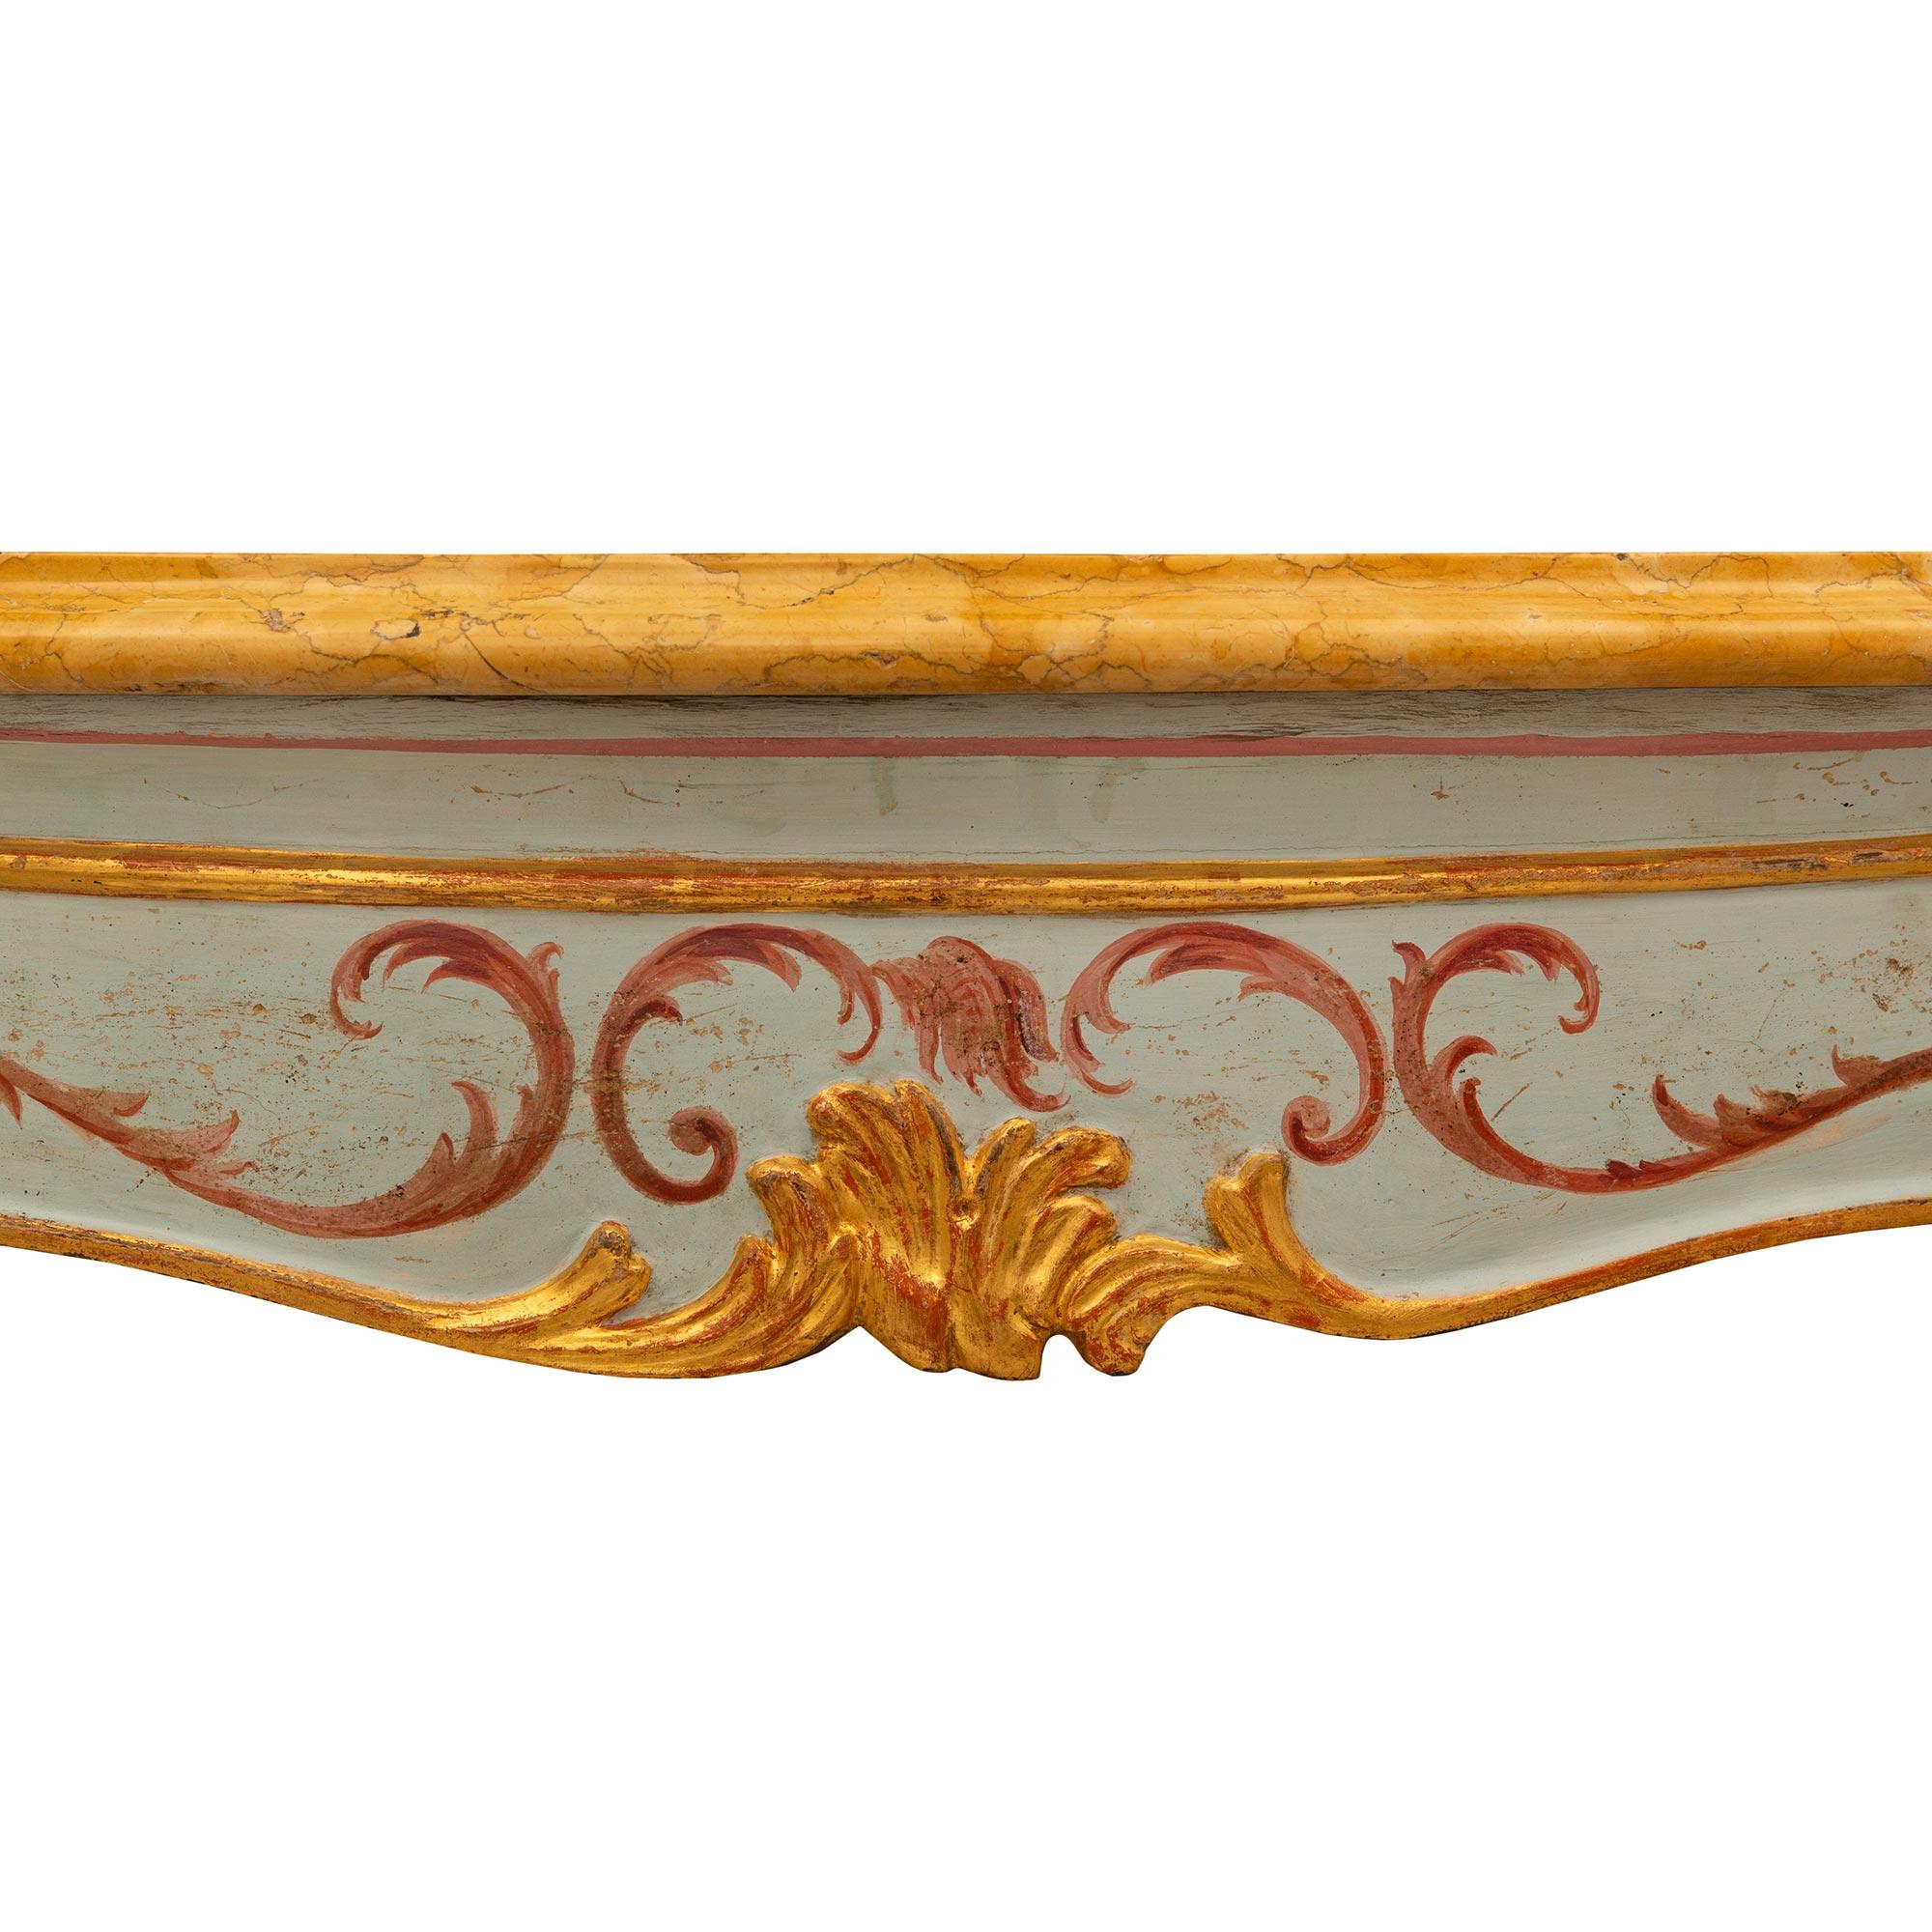  Pair Of Italian 18th c. Venetian St. Giltwood, Patinated Wood & Marble Consoles For Sale 4